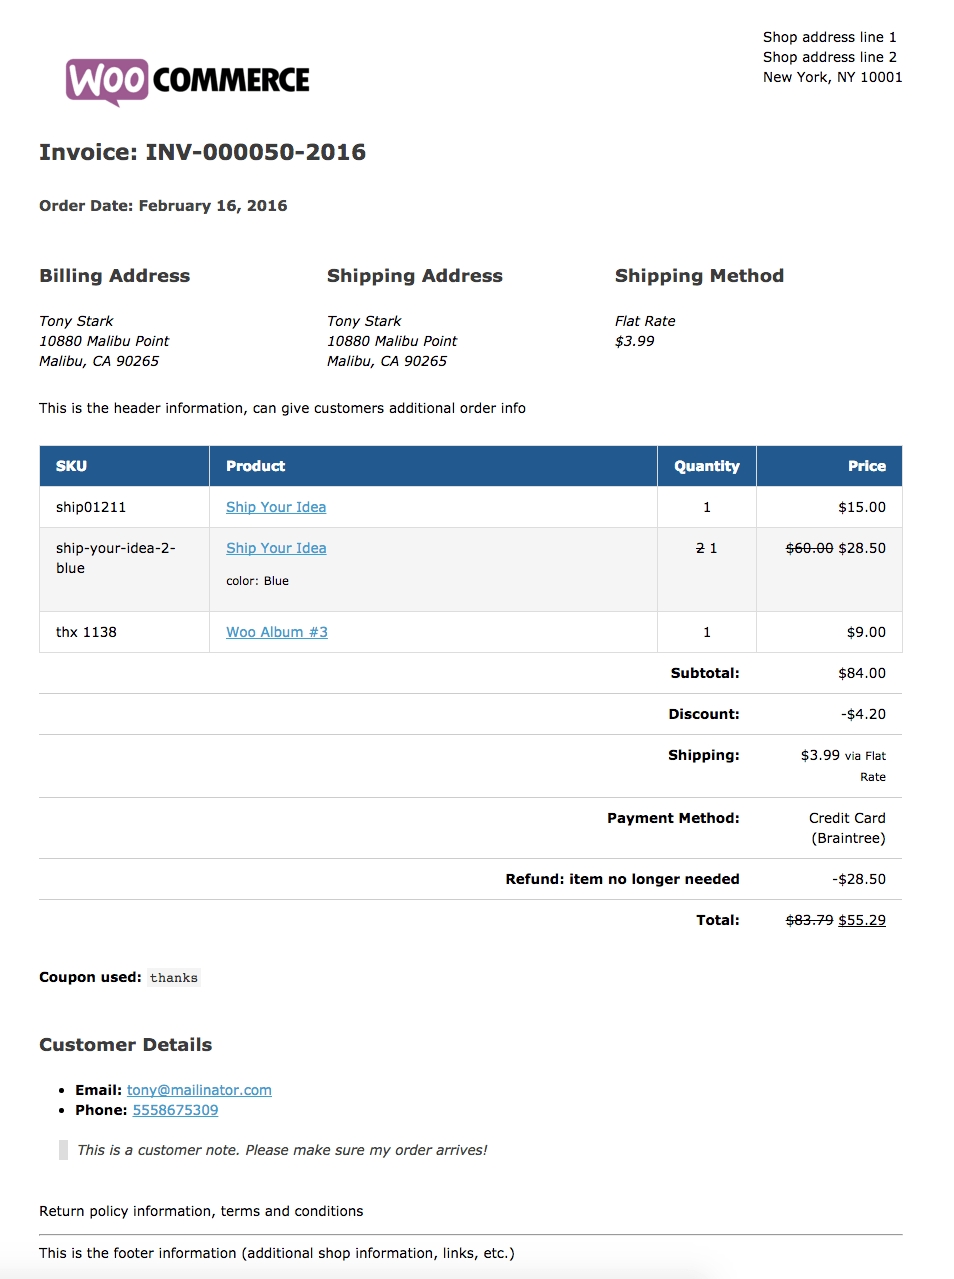 woocommerce print invoices amp packing lists woocommerce docs invoice number example